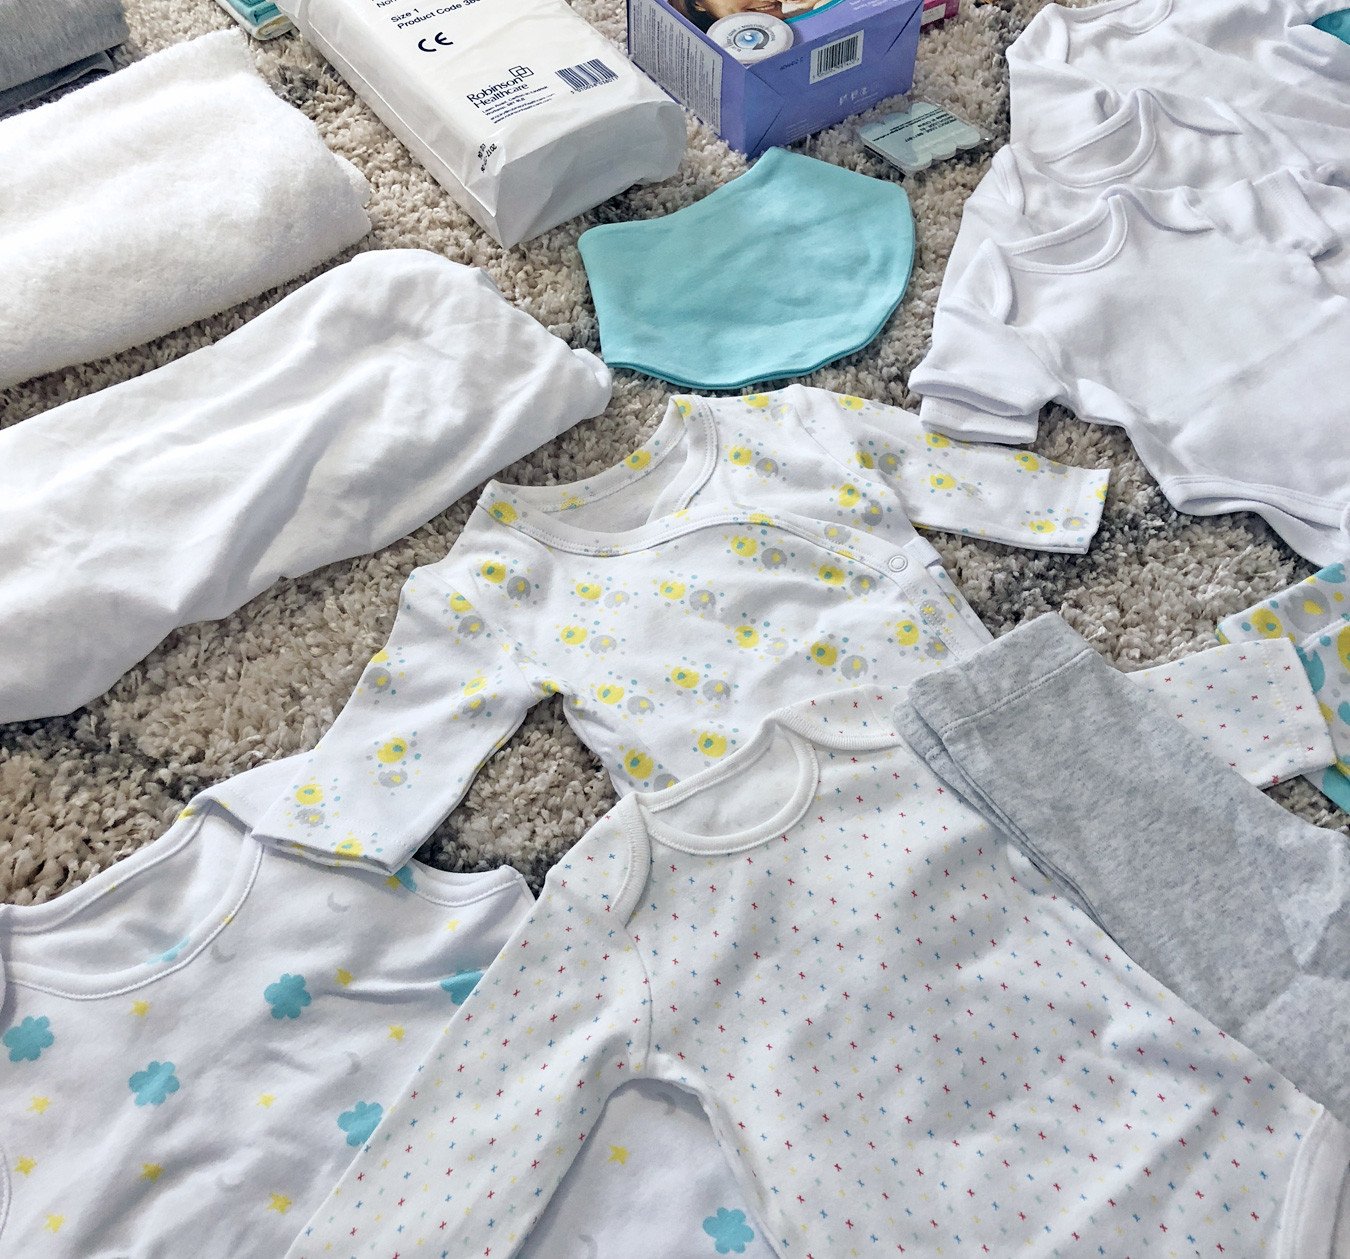 contents of the free baby box available to newborns in Scotland